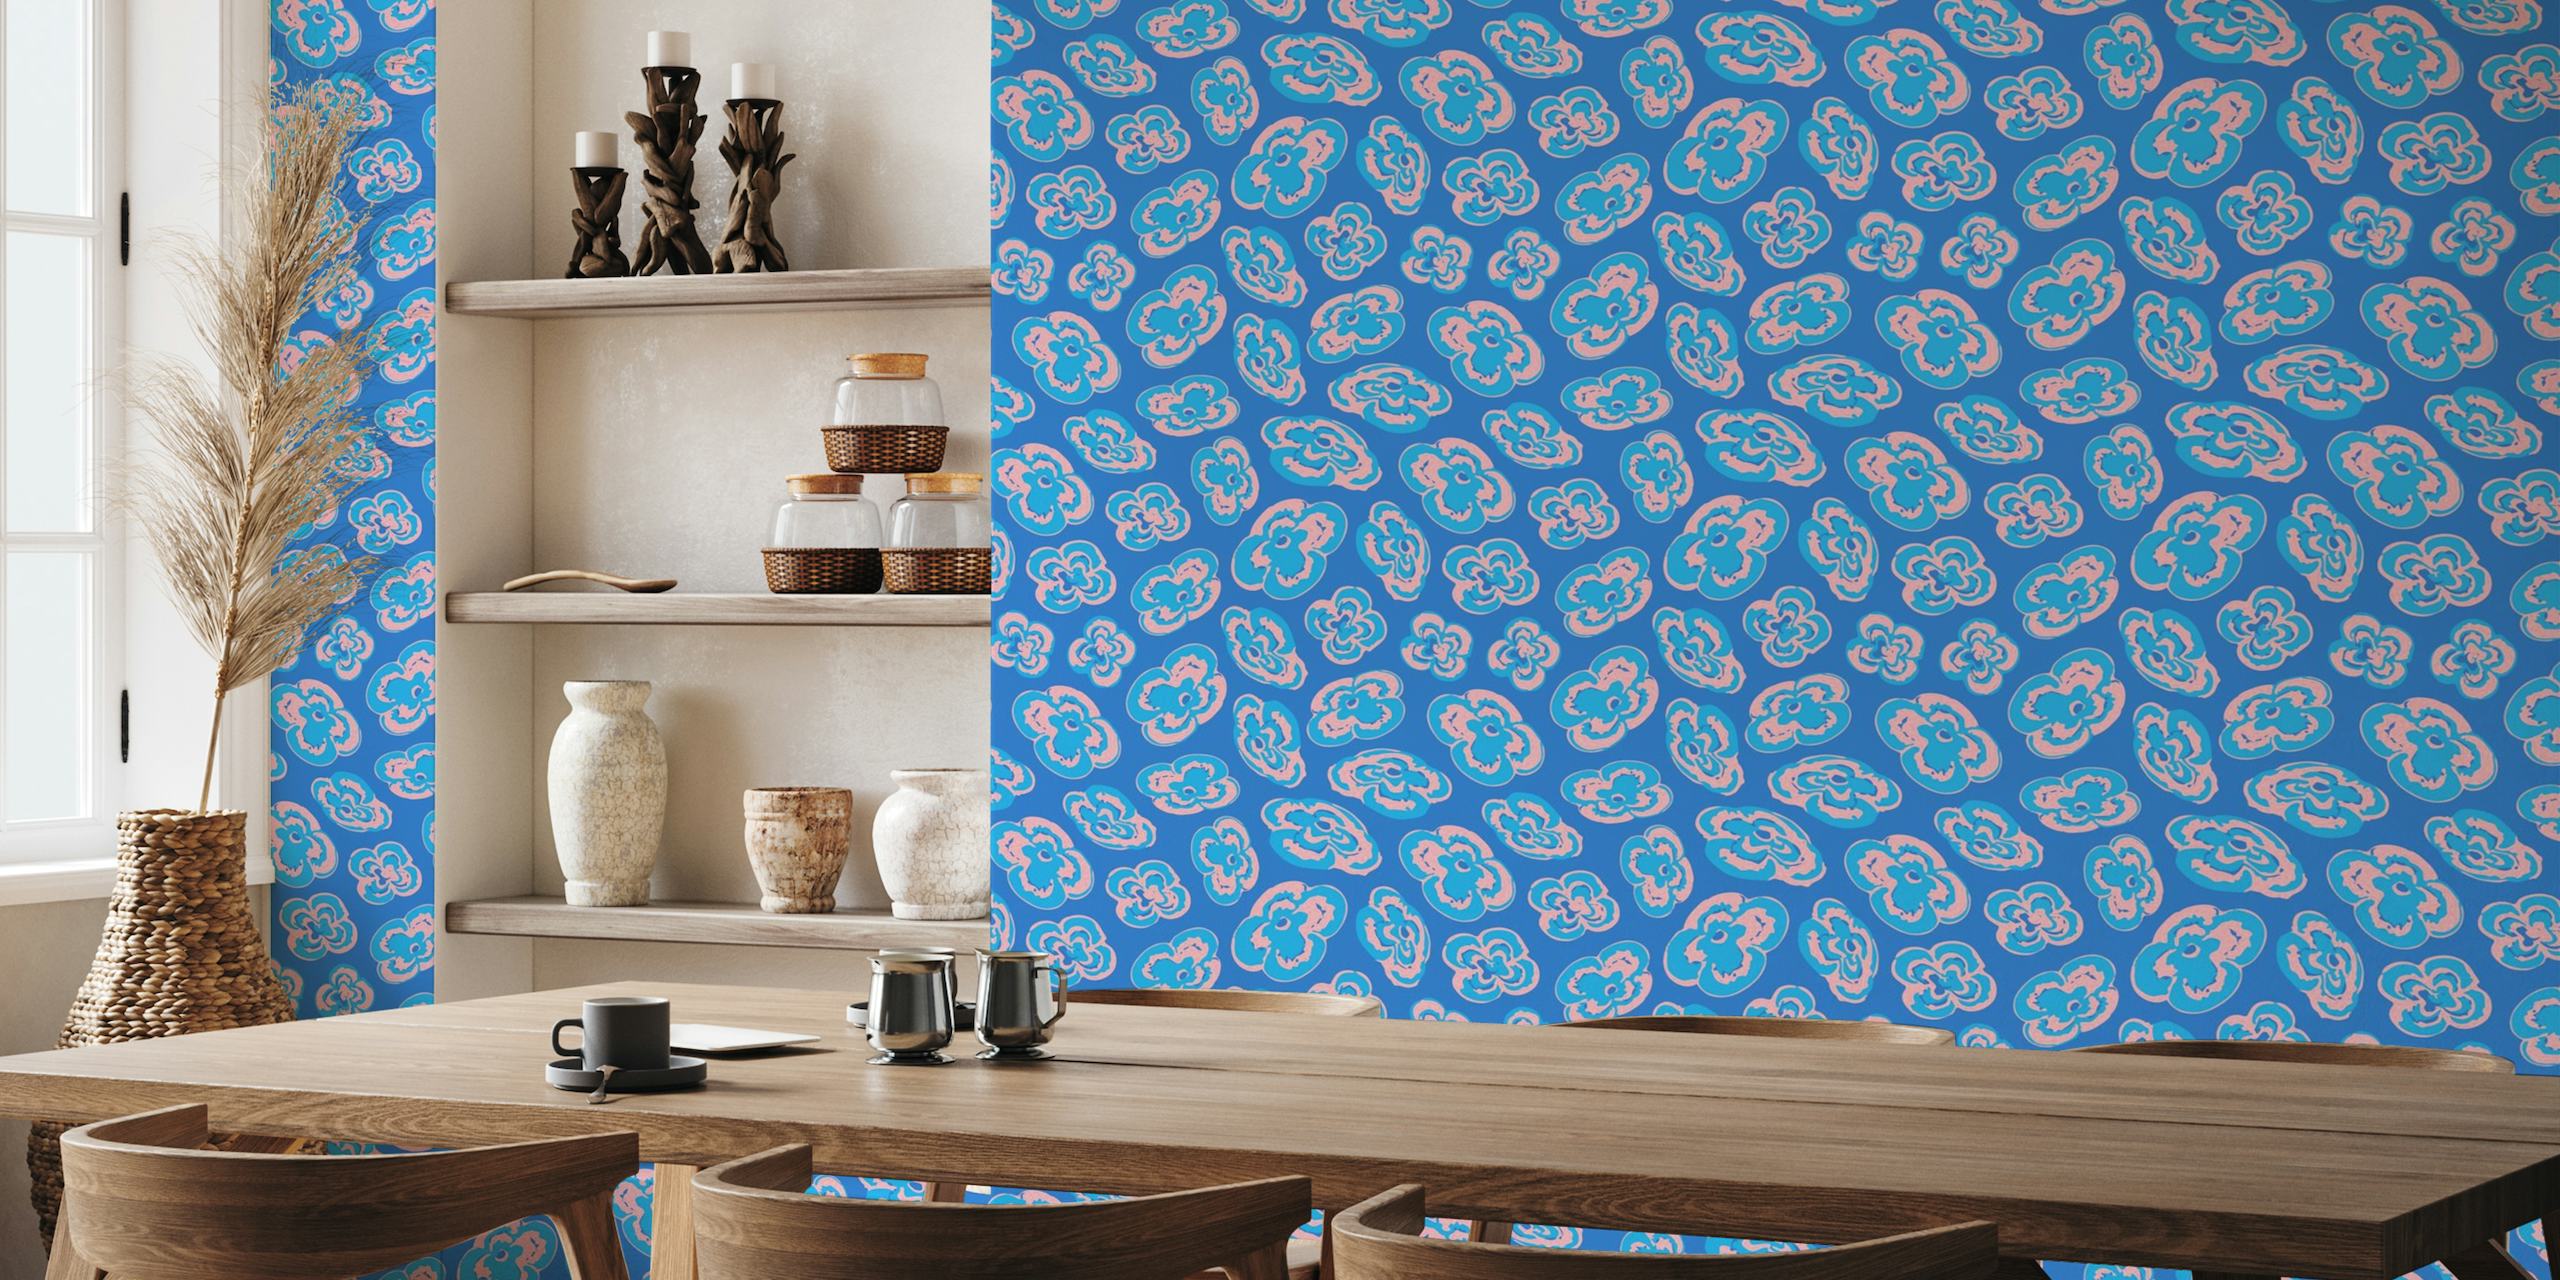 FLOATING LILIES Abstract Floral - Royal Blue papel pintado